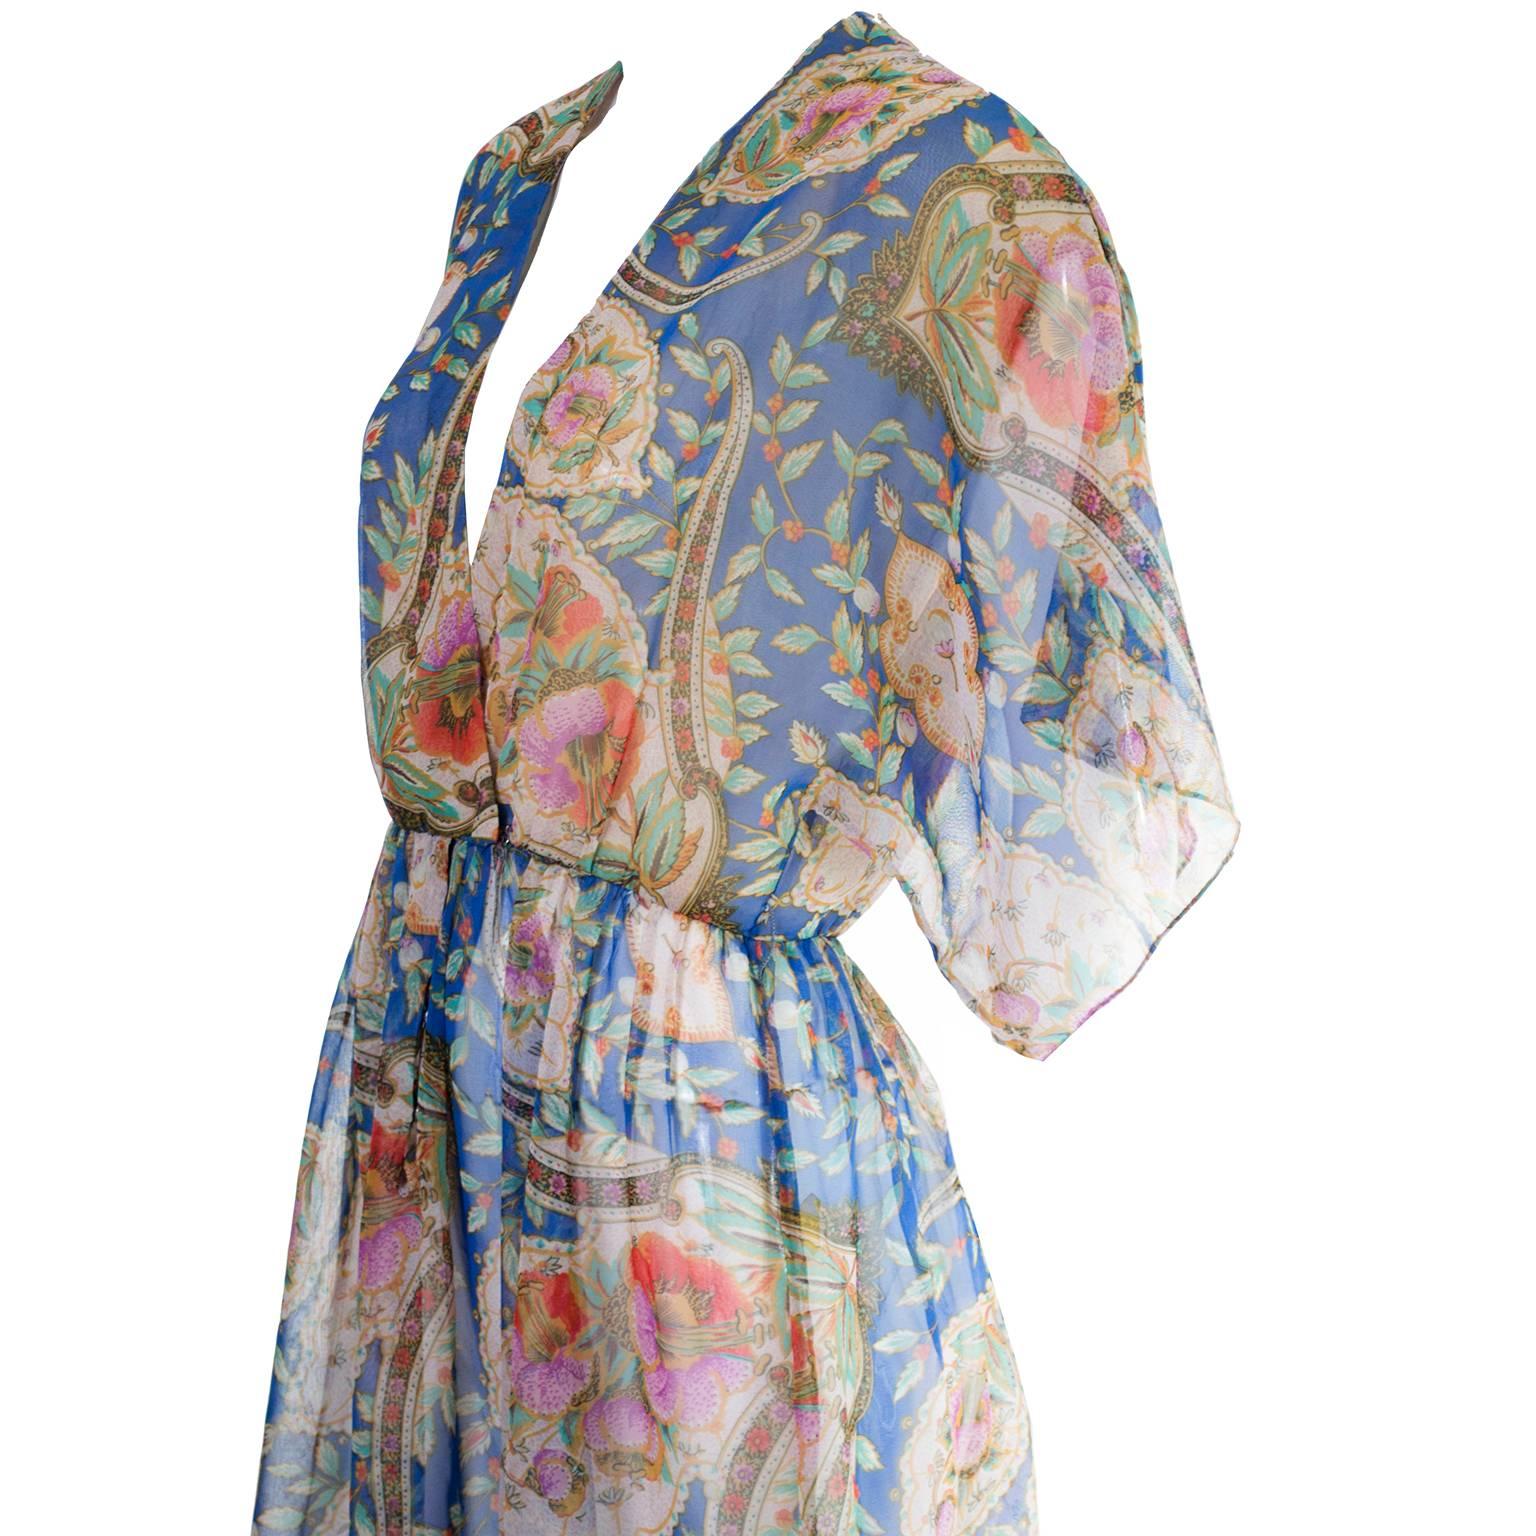 This dreamy size 6 floral chiffon dress was designed by Albert Capraro and was sold at Saks Fifth Avenue in the late 1970’s.  If you are't familiar with Capraro, he started his career at Lily Dache and then went on to work as Oscar de la Renta's